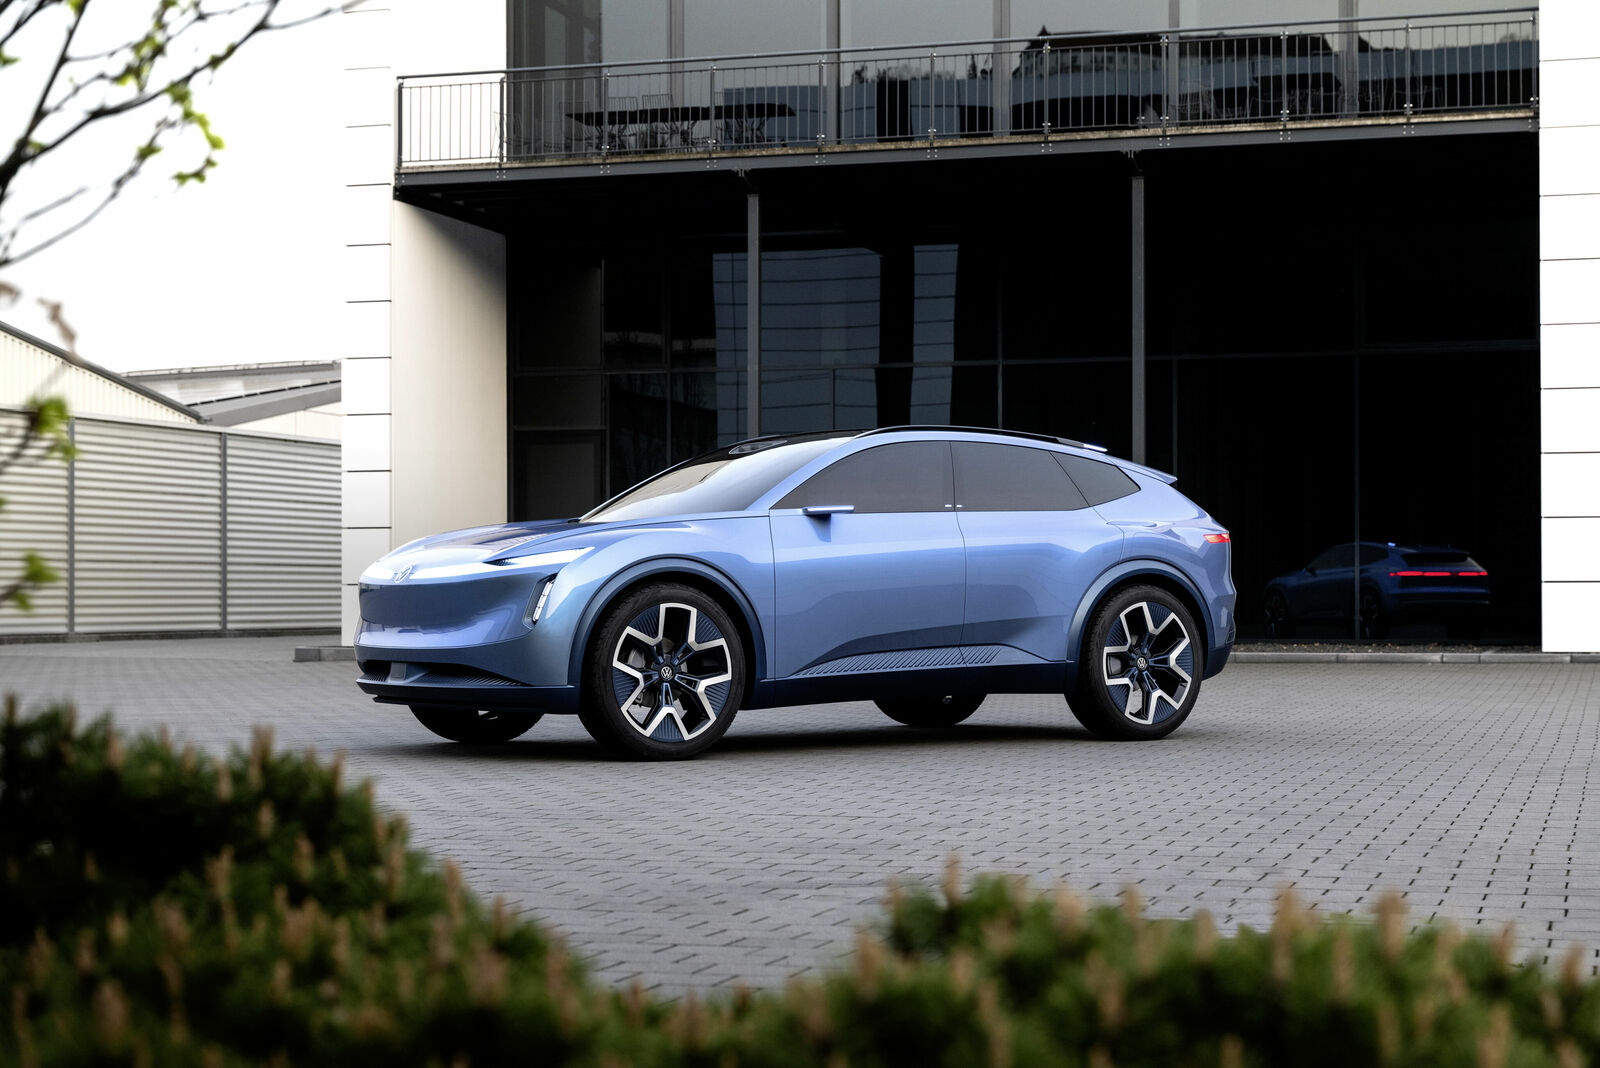 An image of a futuristic blue concept car parked on a paved plaza in front of a modern building with large glass facades and metal structures.